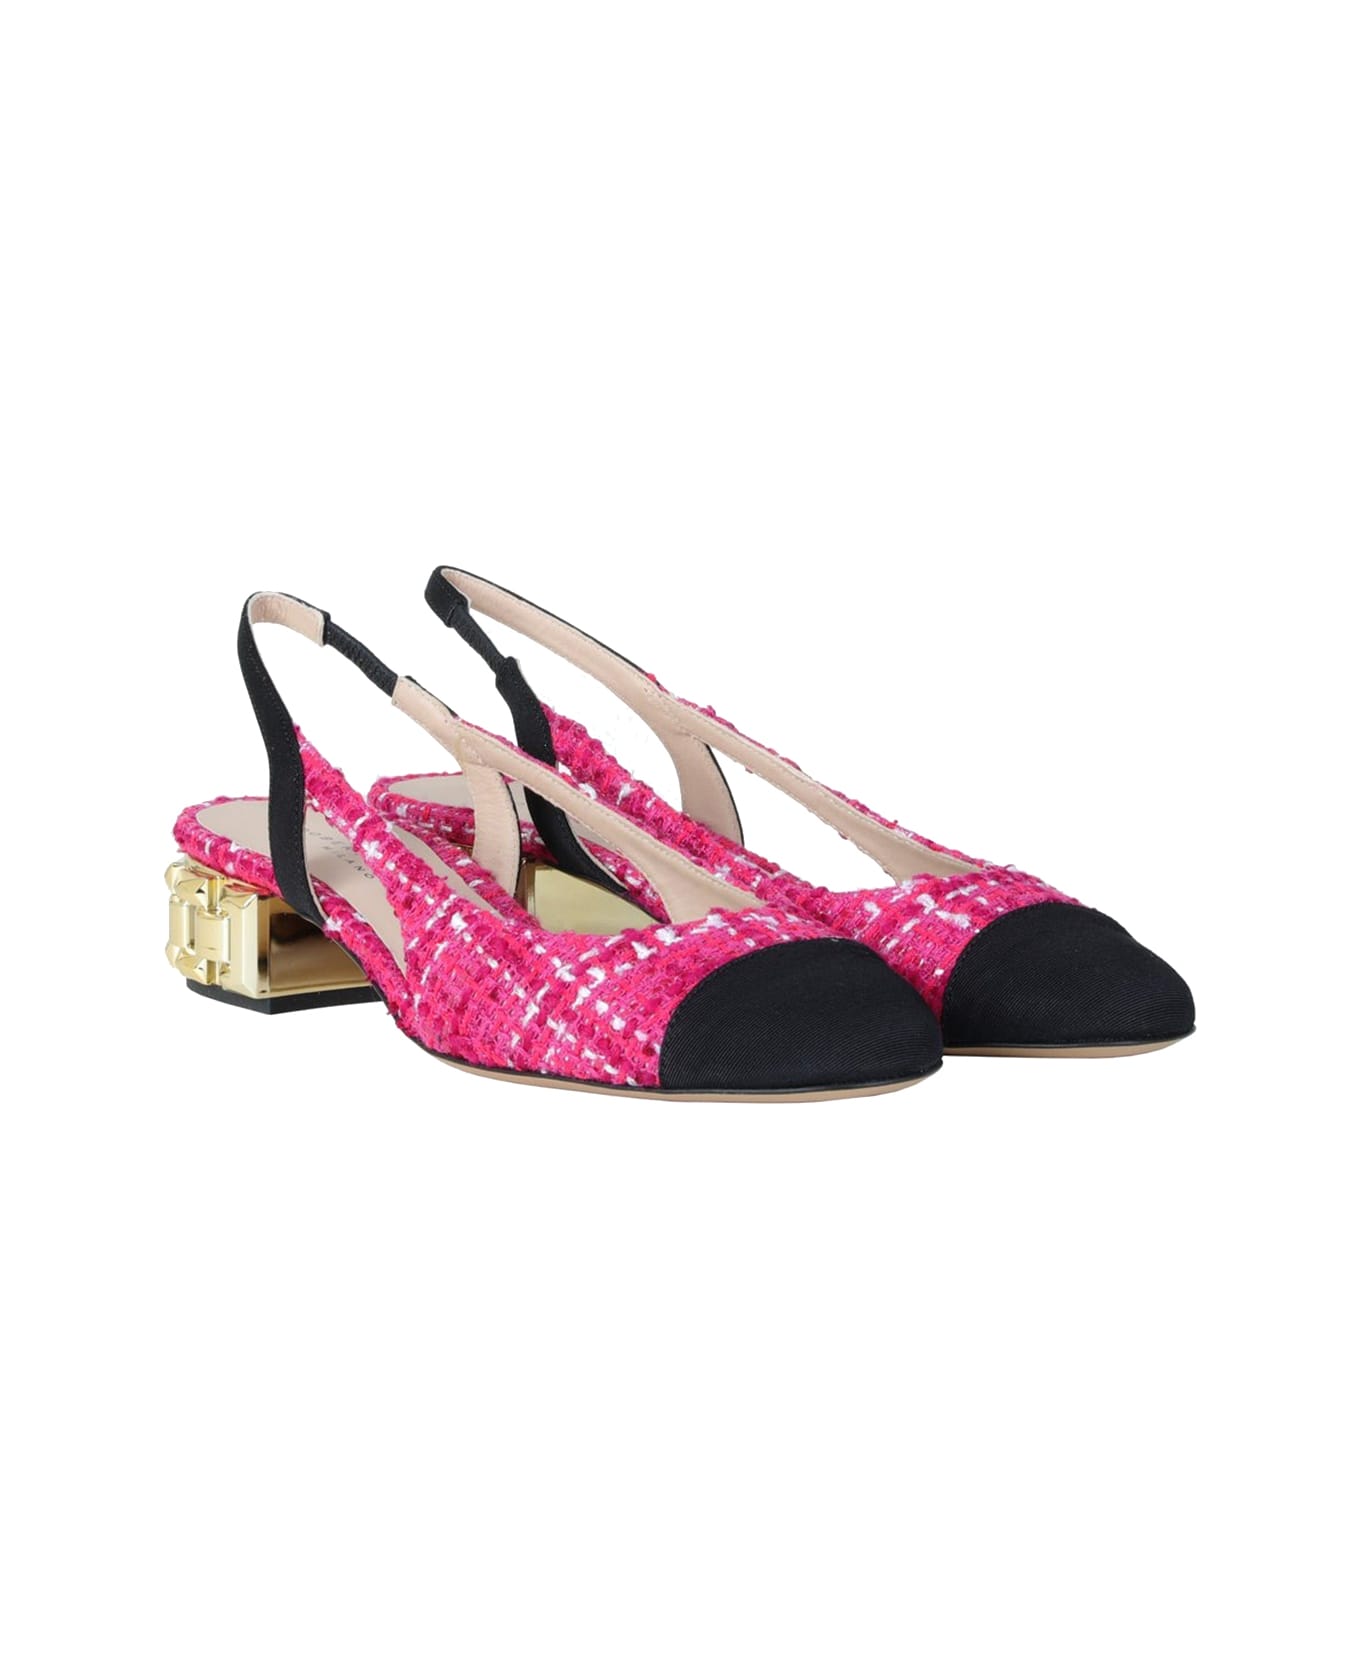 Roberto Festa Chanel Slingback In Cherry Tweed With Gold Chain Heel - FUXIA